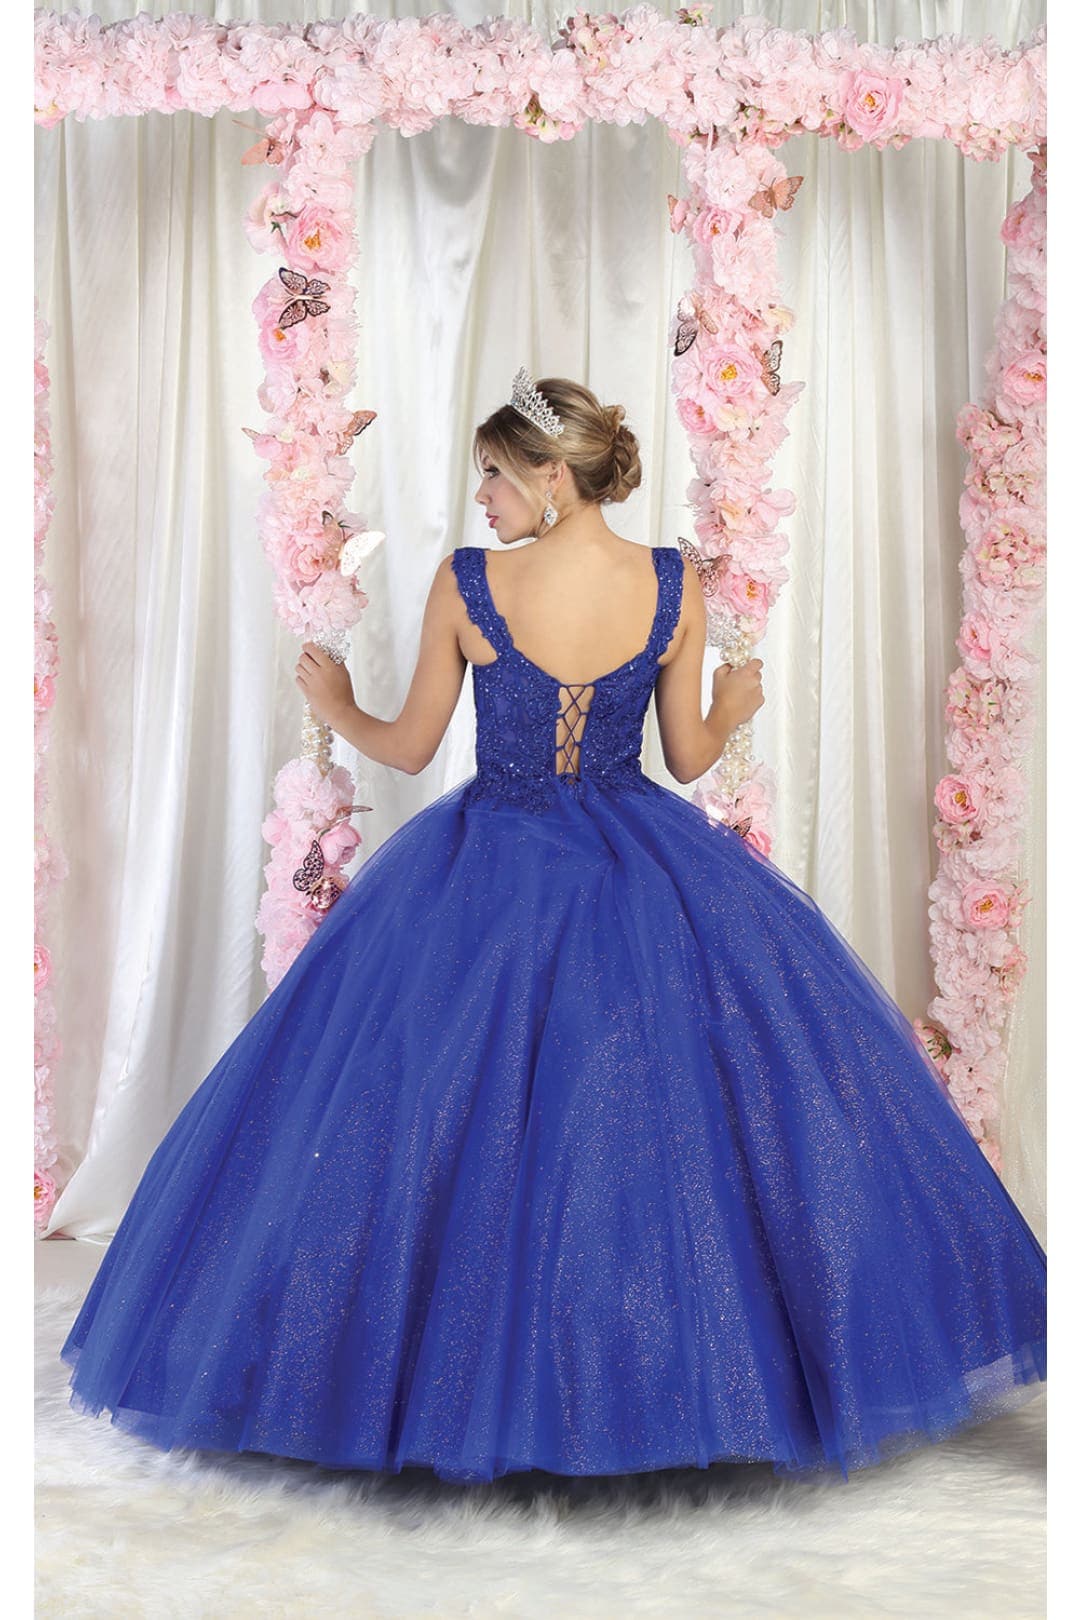 Layla K LK194 Sleeveless Embroidered Quince Ball Gown